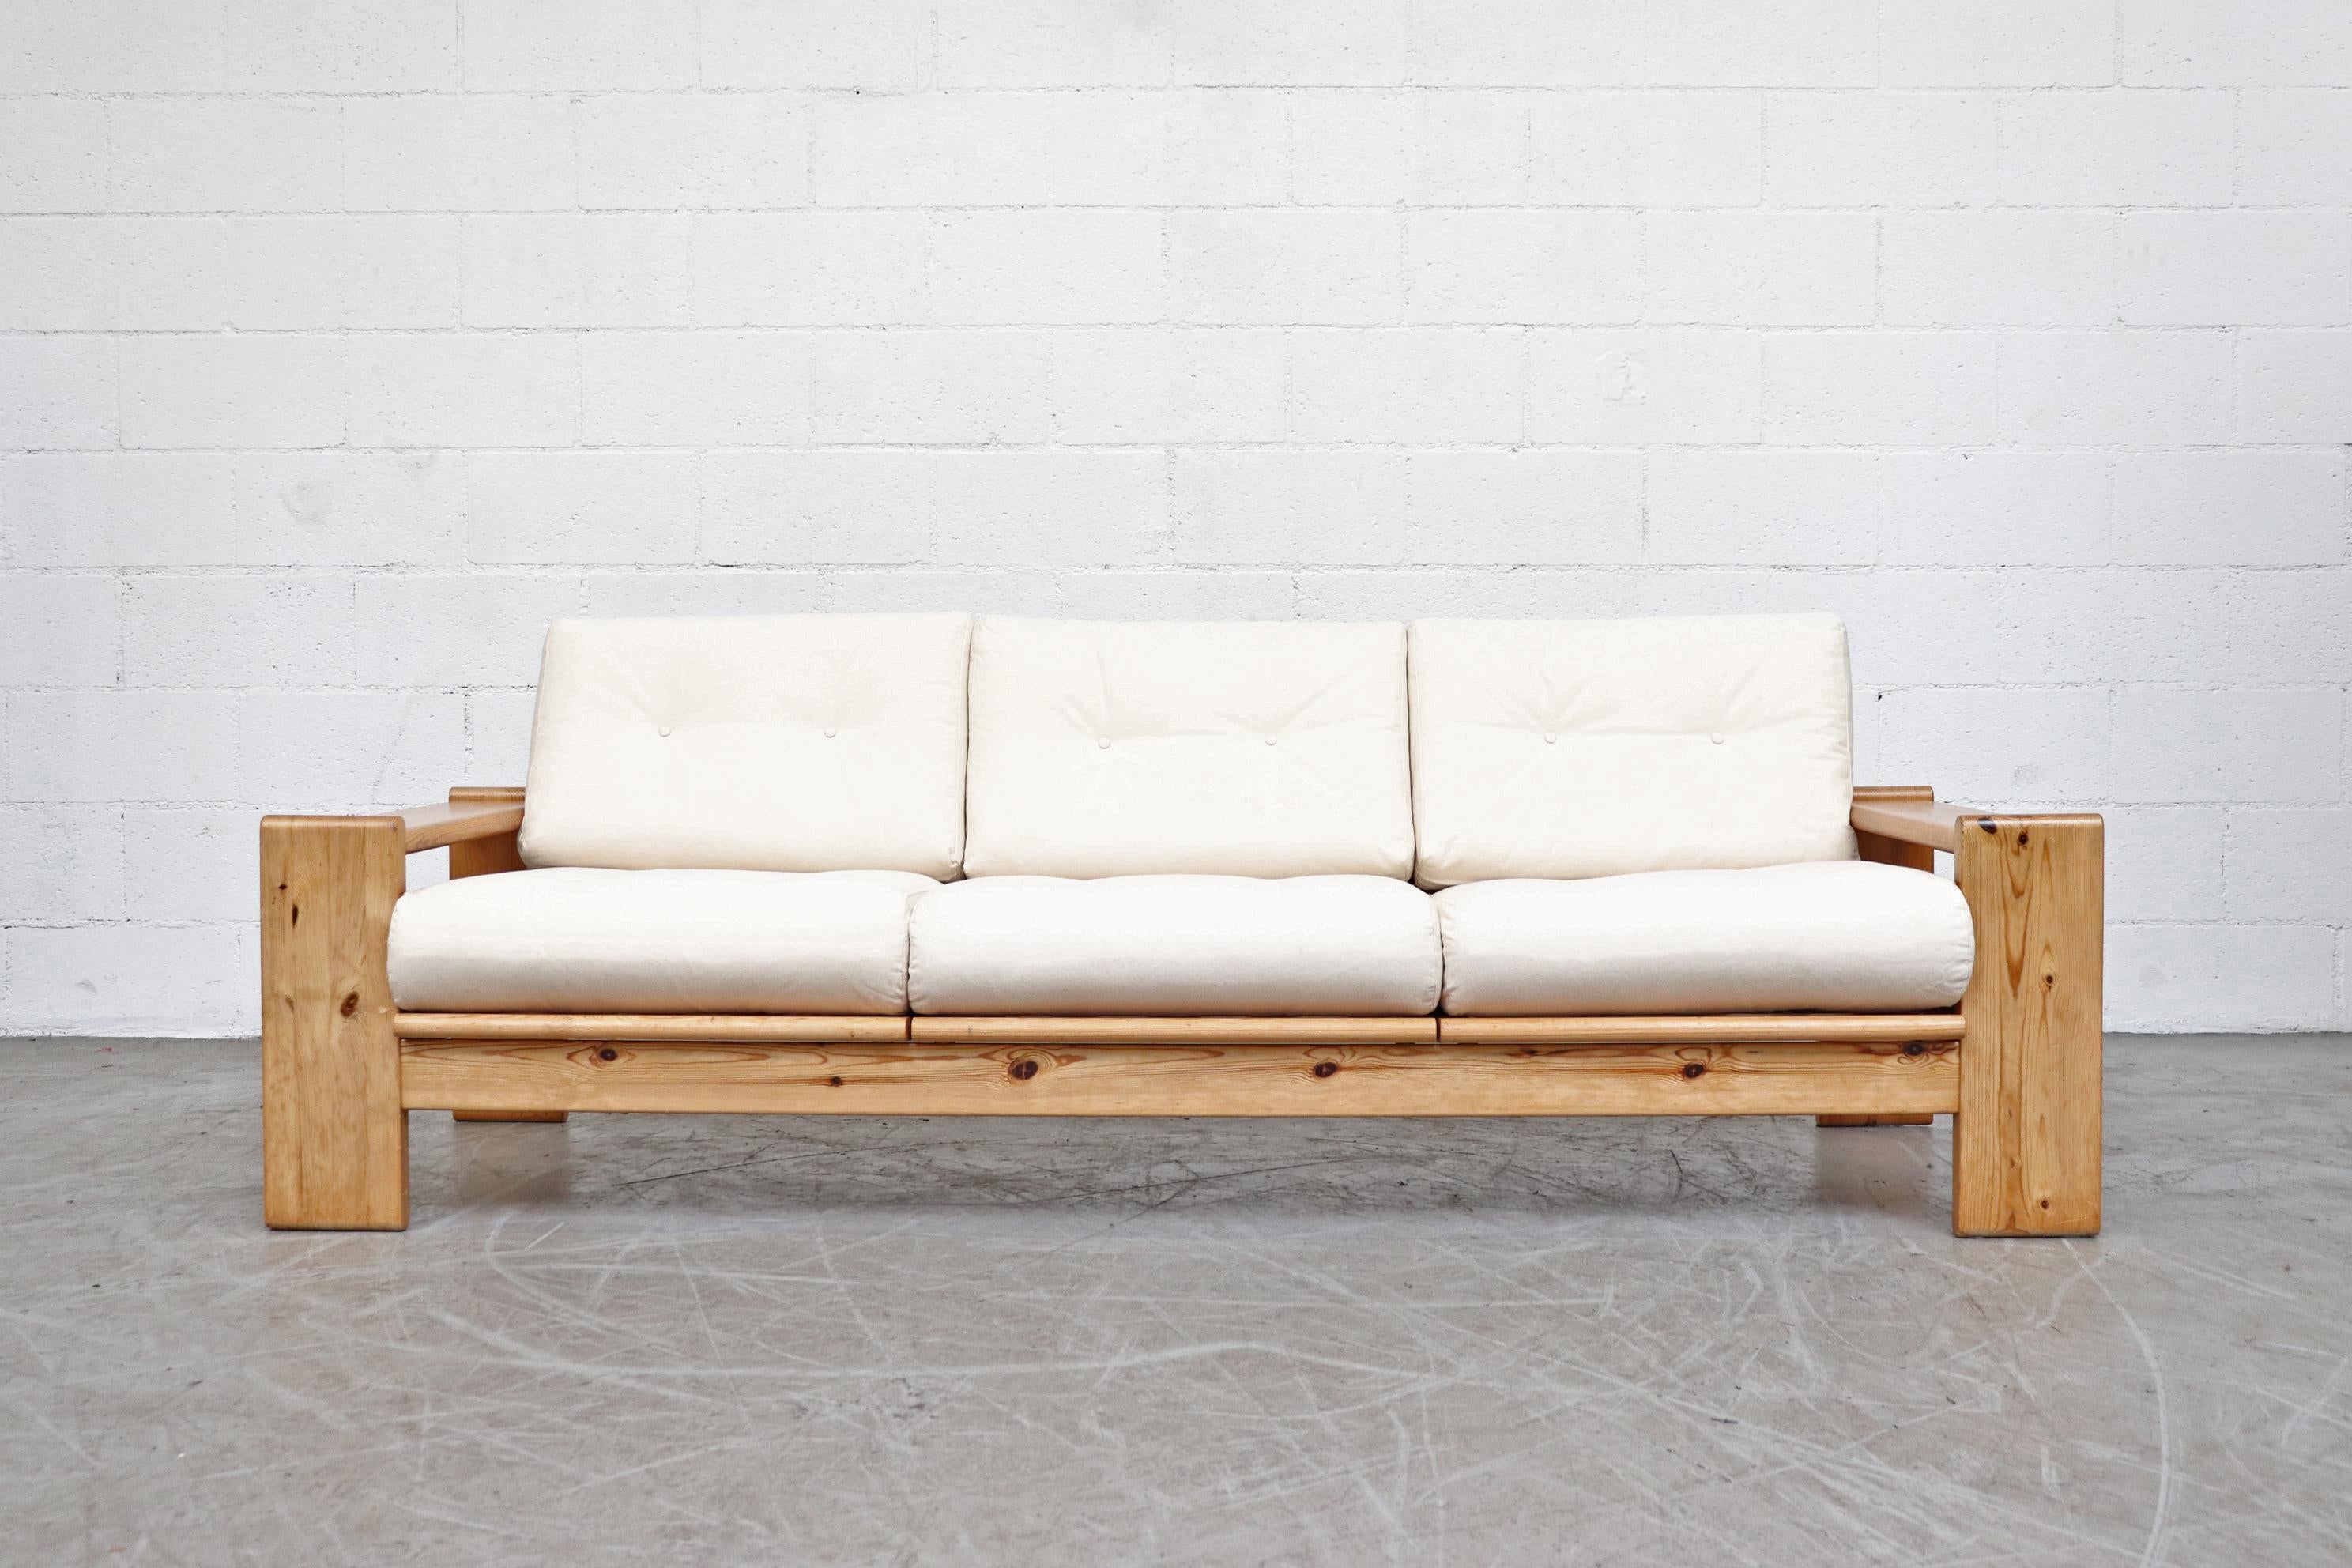 Midcentury Yngve Ekström 3-seat sofa with lightly refinished pine frame. Newly upholstered in white canvas. In otherwise good original condition. Photographed with matching loveseat also available (LU922413509852), listed separately.